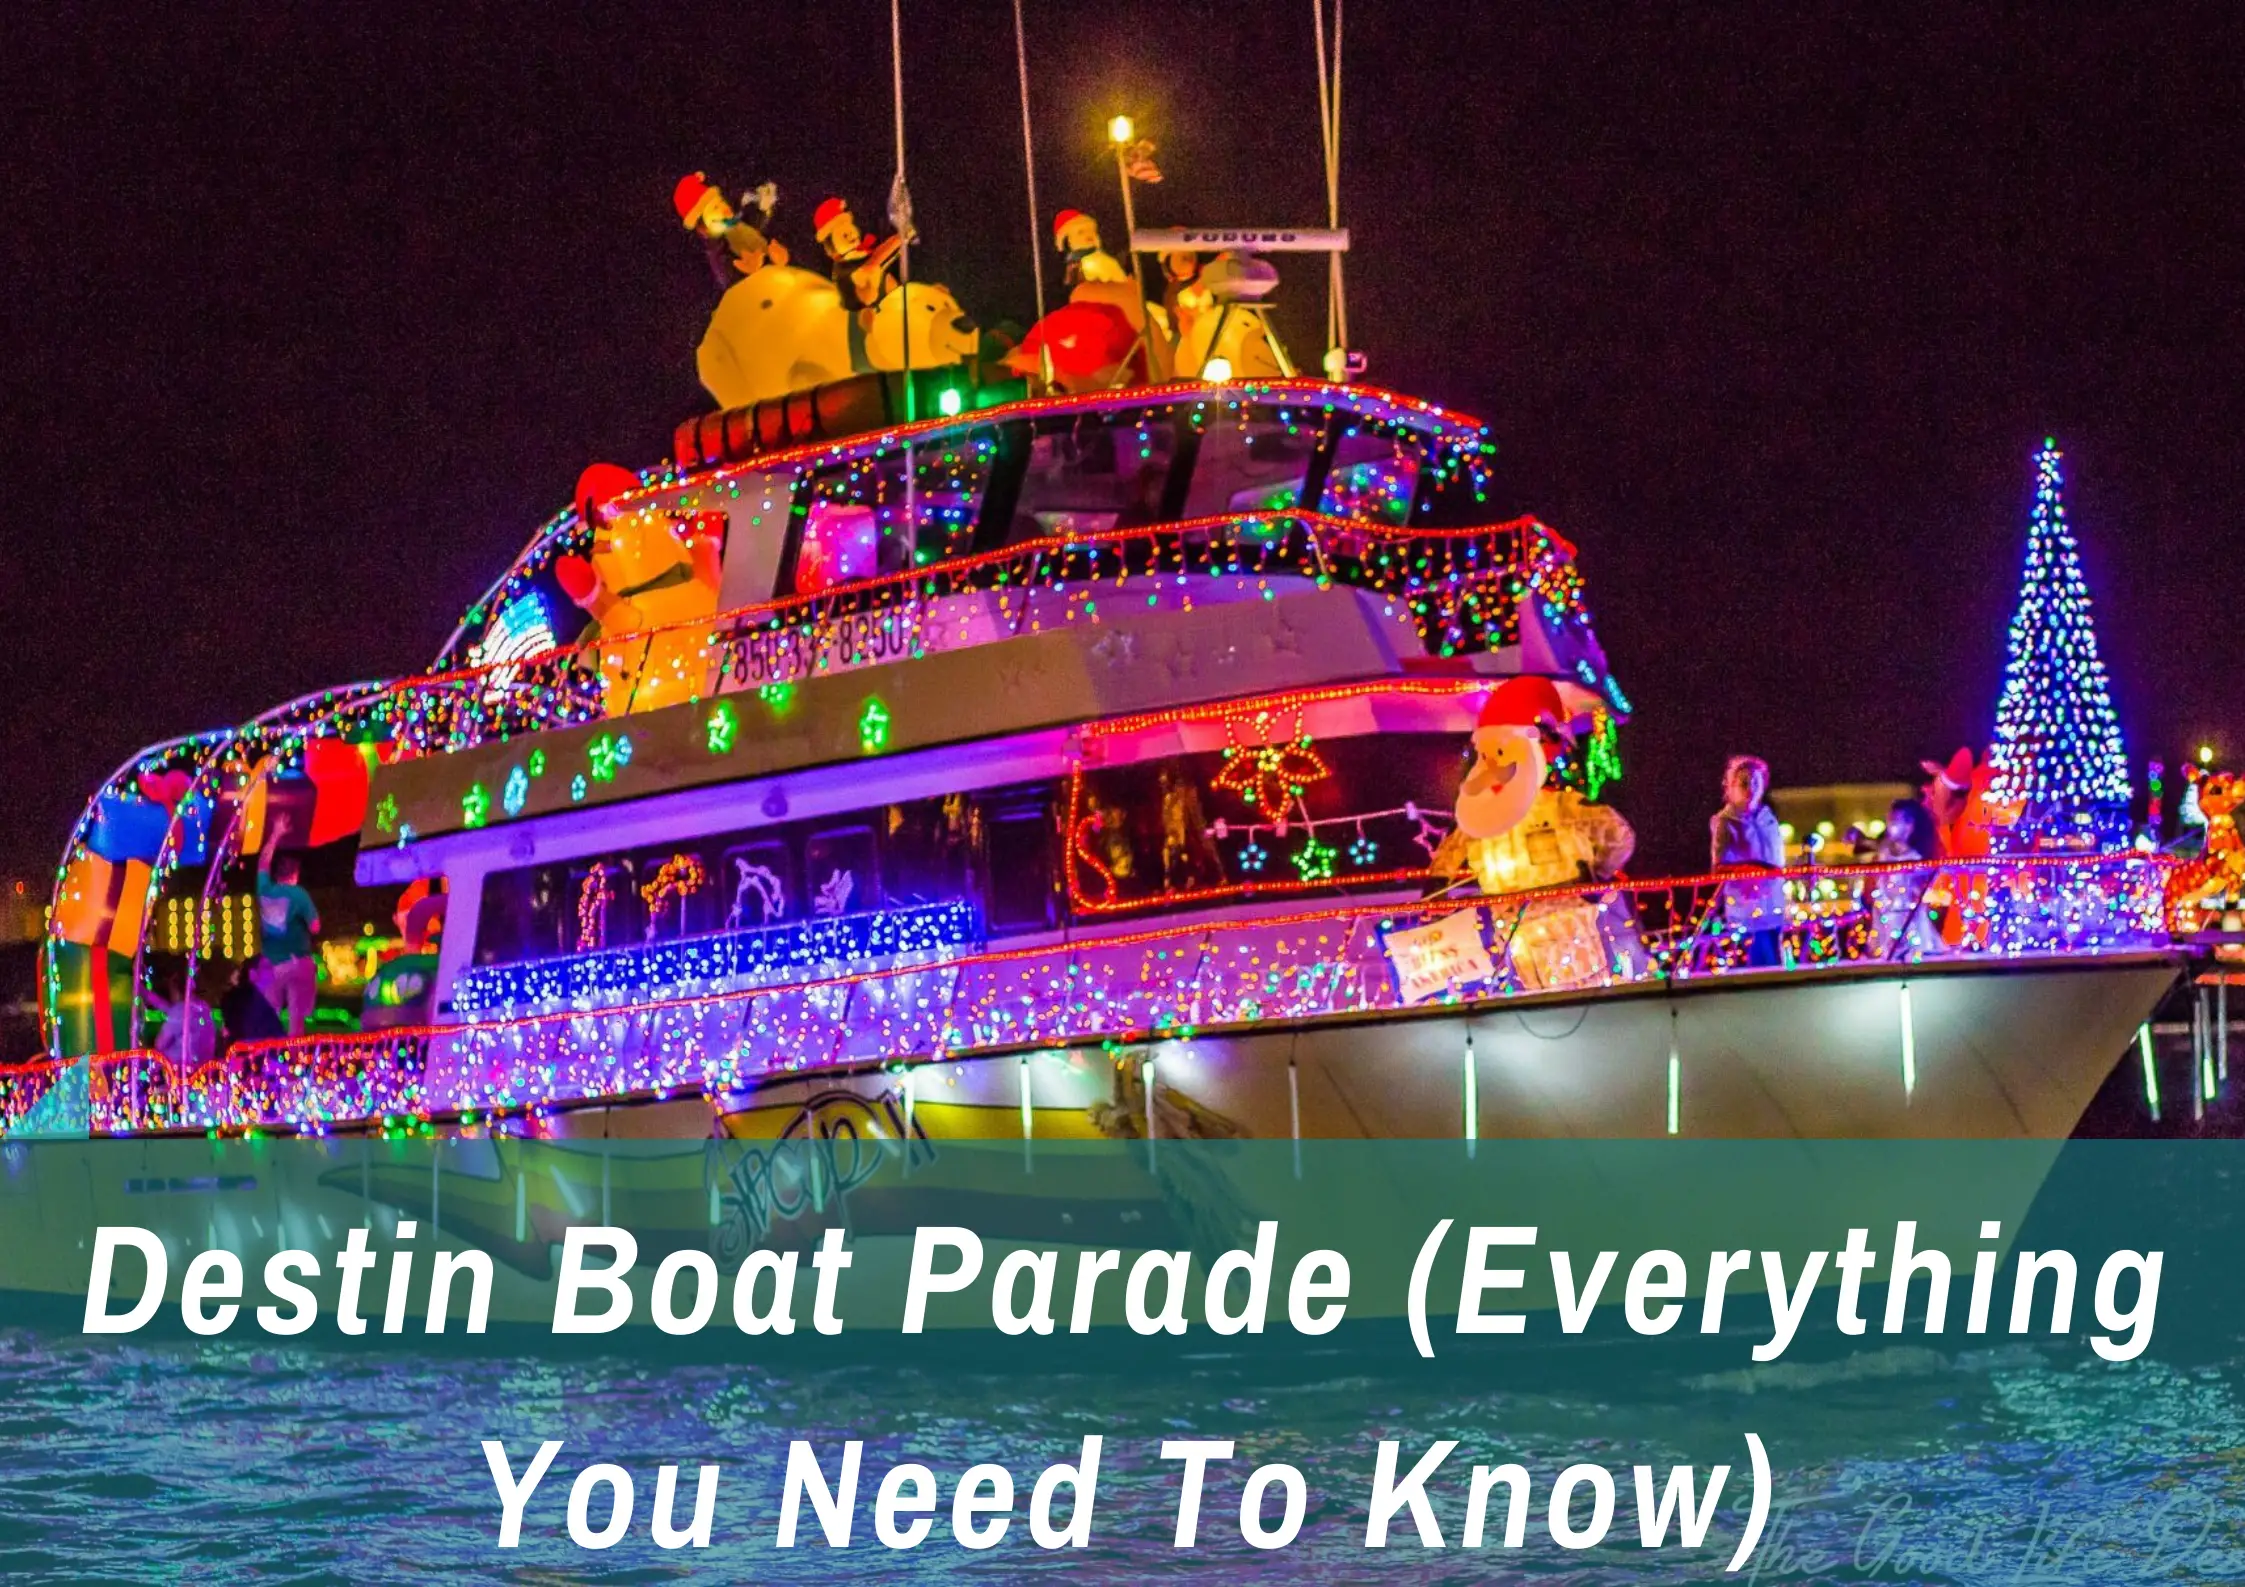 Destin-Boat-Parade-everything-you-need-to-know